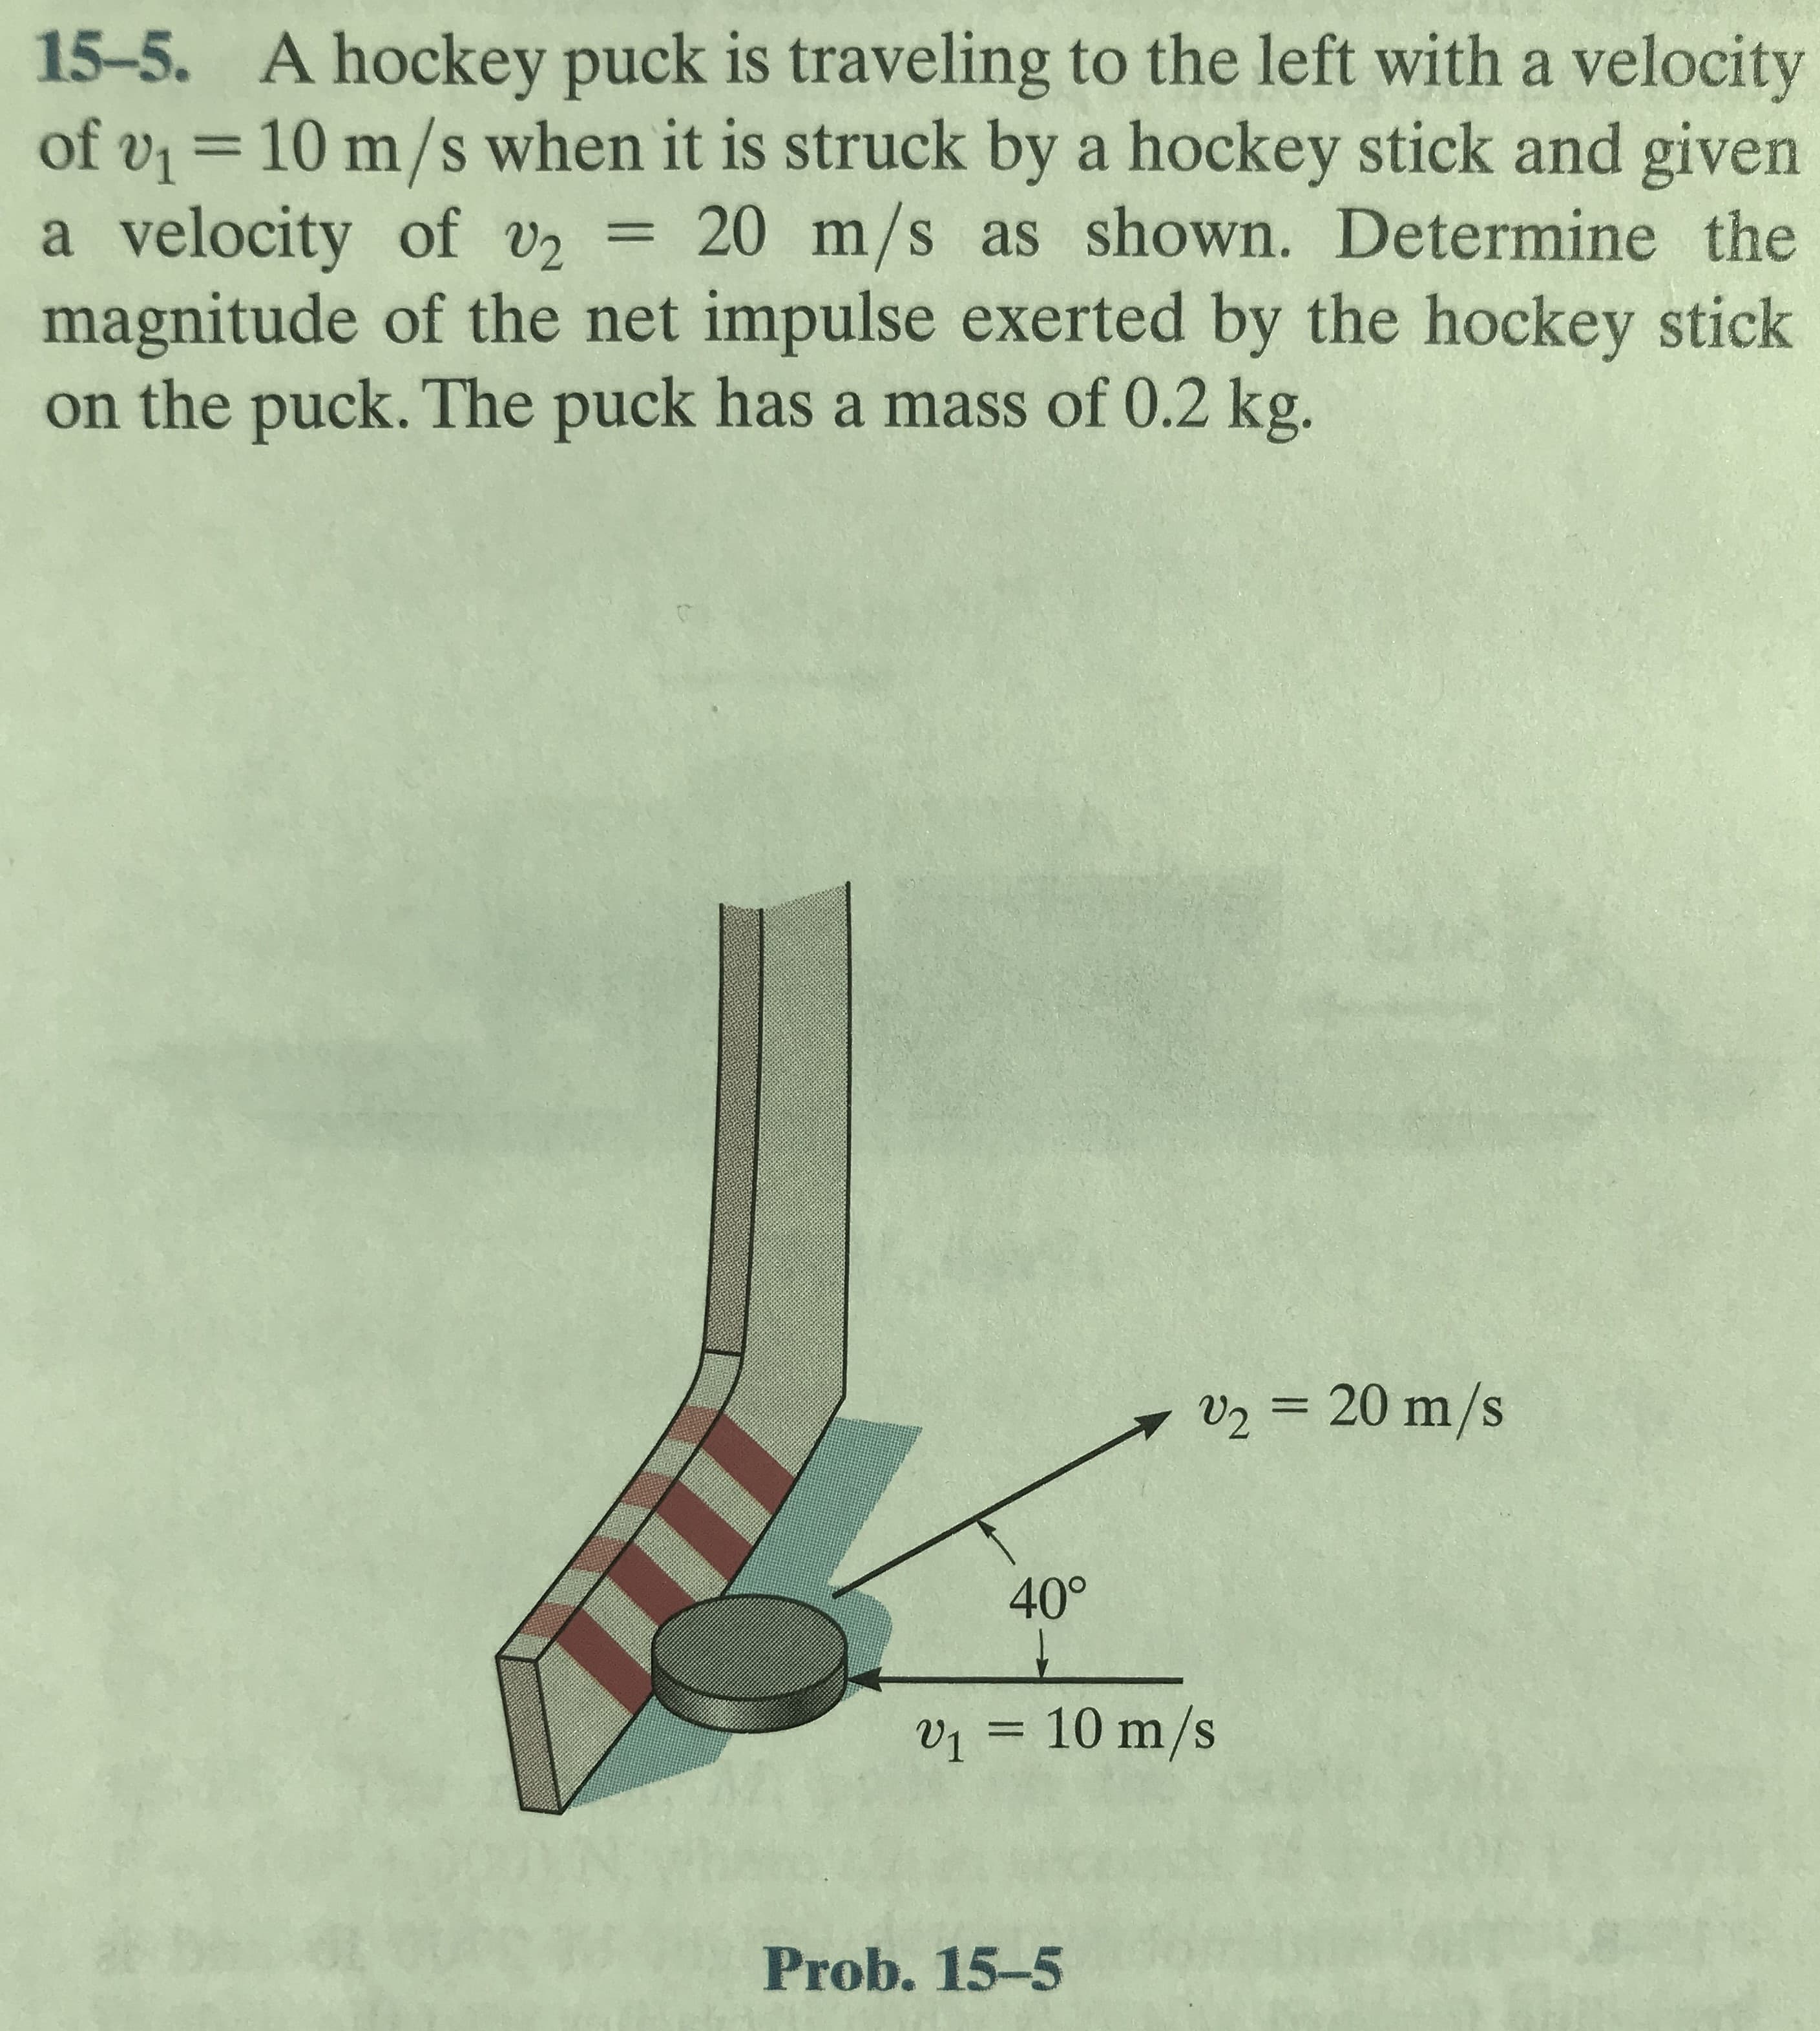 15-5. A hockey puck is traveling to the left with a velocity
of v =10 m/s when it is struck by a hockey stick and given
a velocity of v2 = 20 m/s as shown. Determine the
magnitude of the net impulse exerted by the hockey stick
on the puck. The puck has a mass of 0.2 kg.
%3D
%3D
V2 = 20 m/s
40°
v1 = 10 m/s
Prob. 15-5
